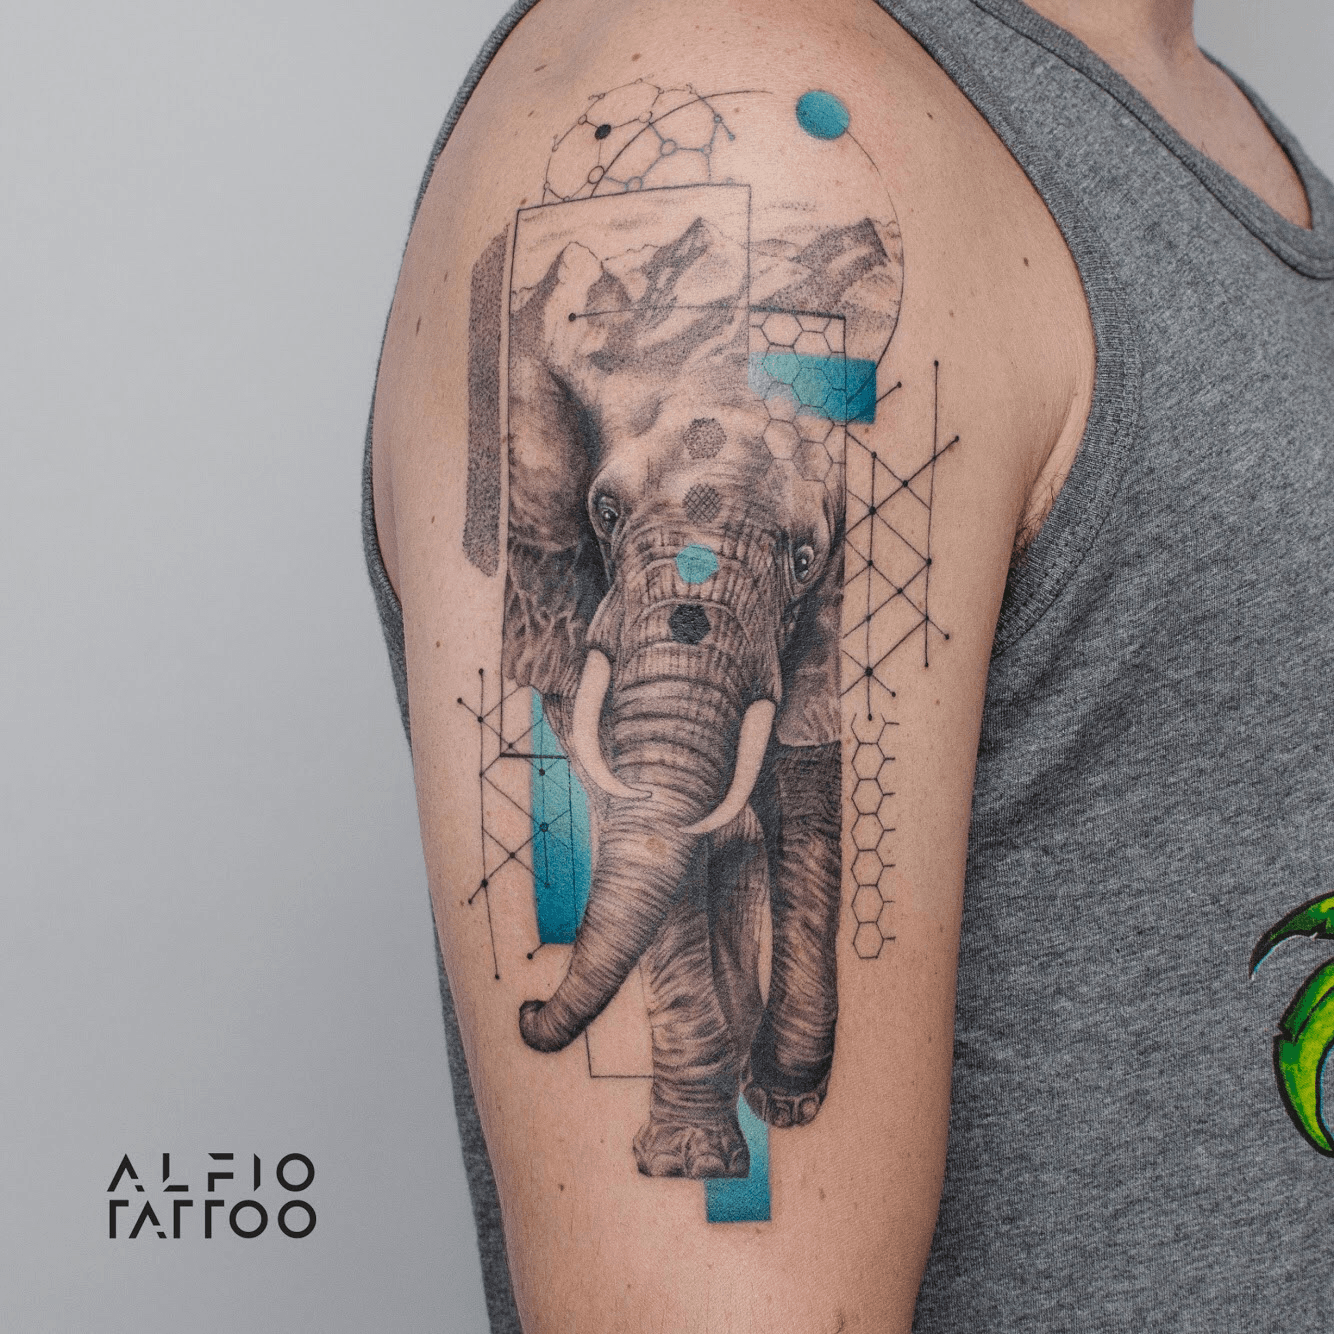 Elephant Tattoo Designs  Ideas for Men and Women